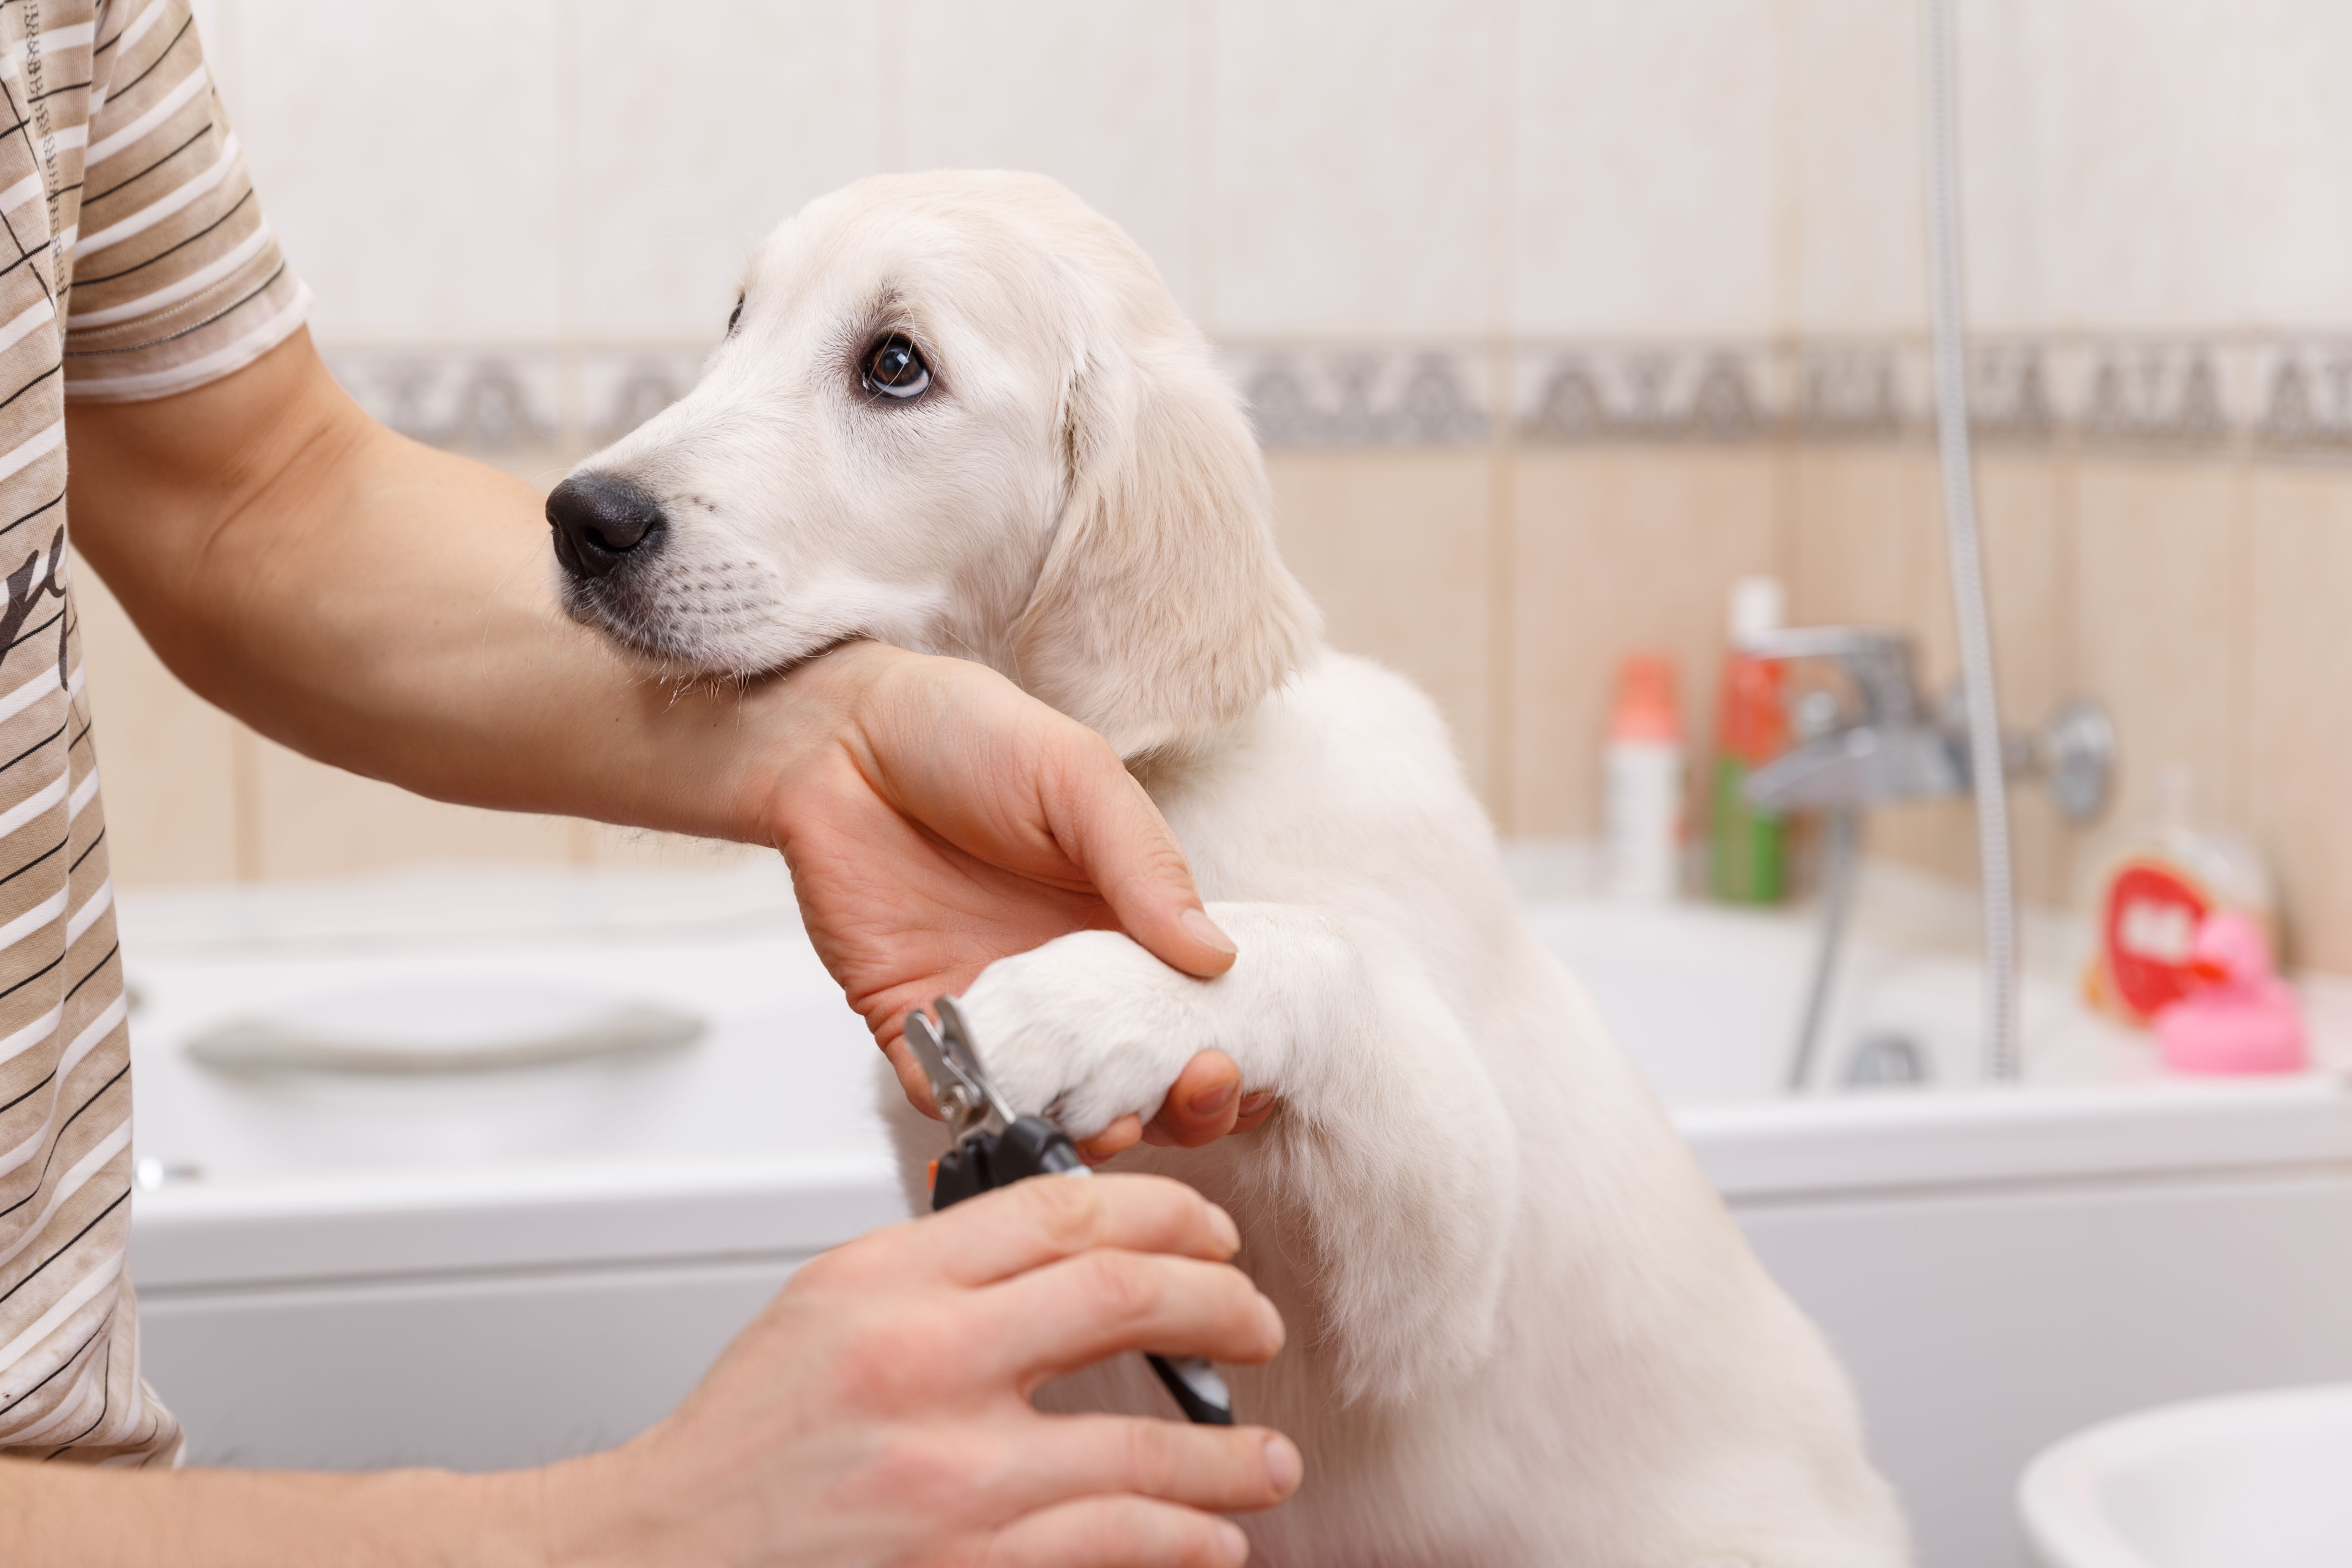 places to groom your dog